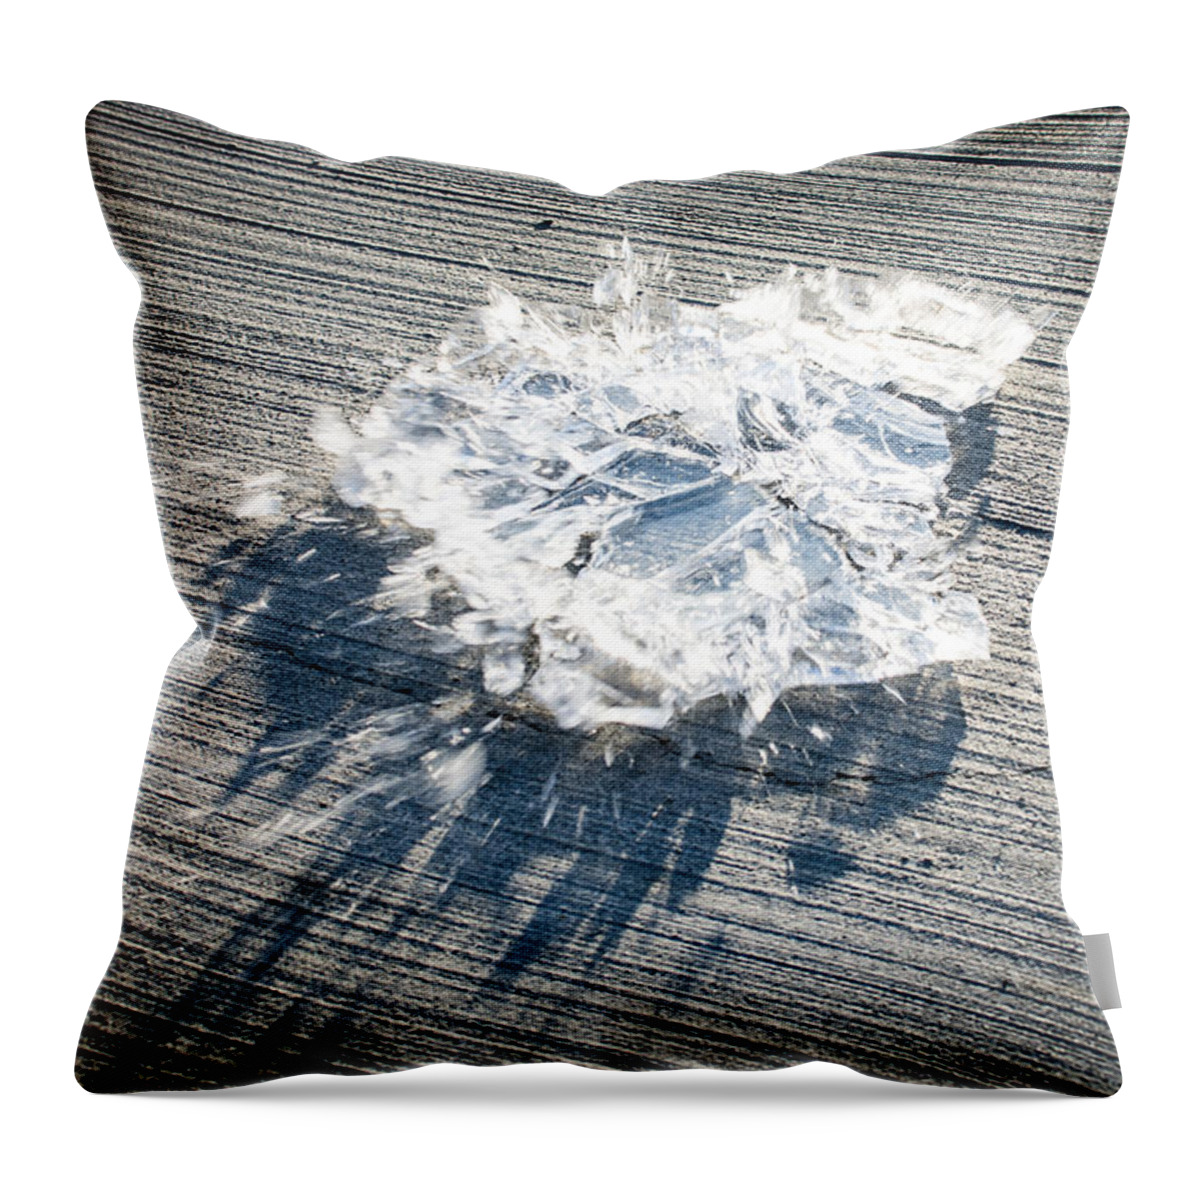 Ice Throw Pillow featuring the photograph Ice Sheet Bursting Into Shards by Andreas Berthold